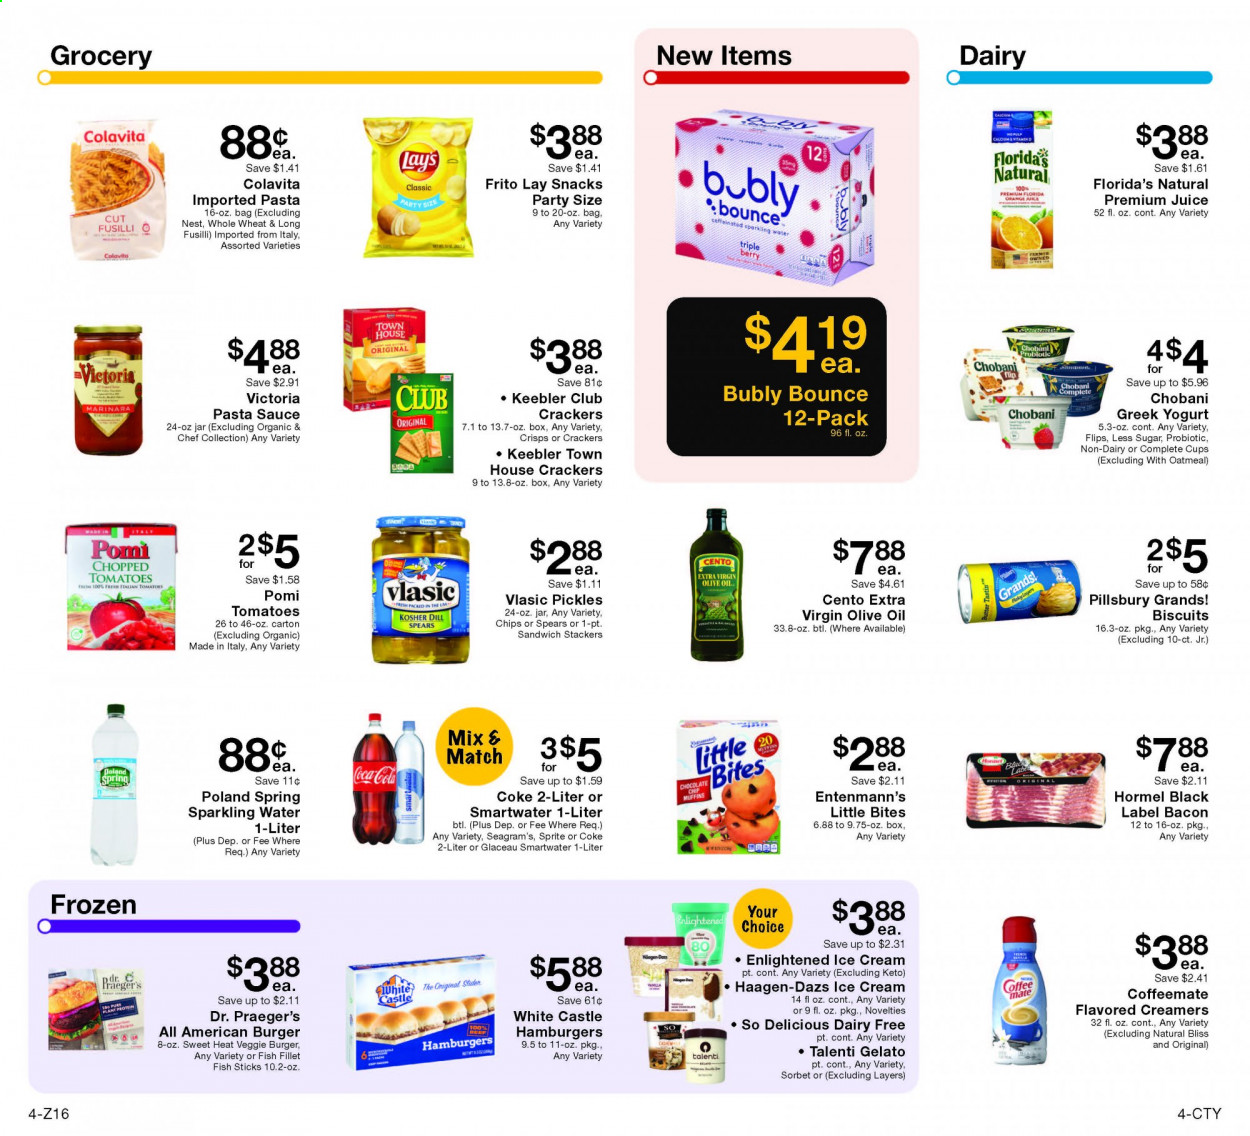 thumbnail - Fairway Market Flyer - 04/09/2021 - 04/15/2021 - Sales products - muffin, Entenmann's, snack, fish fillets, pasta sauce, sandwich, sauce, Pillsbury, veggie burger, fish sticks, Hormel, plant based product, bacon, greek yoghurt, Chobani, Coffee-Mate, creamer, ice cream, Häagen-Dazs, Talenti Gelato, Enlightened lce Cream, gelato, sorbet, crackers, biscuit, Little Bites, Florida's Natural, Keebler, Lay’s, salty snack, crisps, oatmeal, pickles, chopped tomatoes, pickled vegetables, fusilli, extra virgin olive oil, olive oil, oil, Coca-Cola, Sprite, soft drink, Coke, sparkling water, bottled water, Smartwater, water, carbonated soft drink. Page 4.